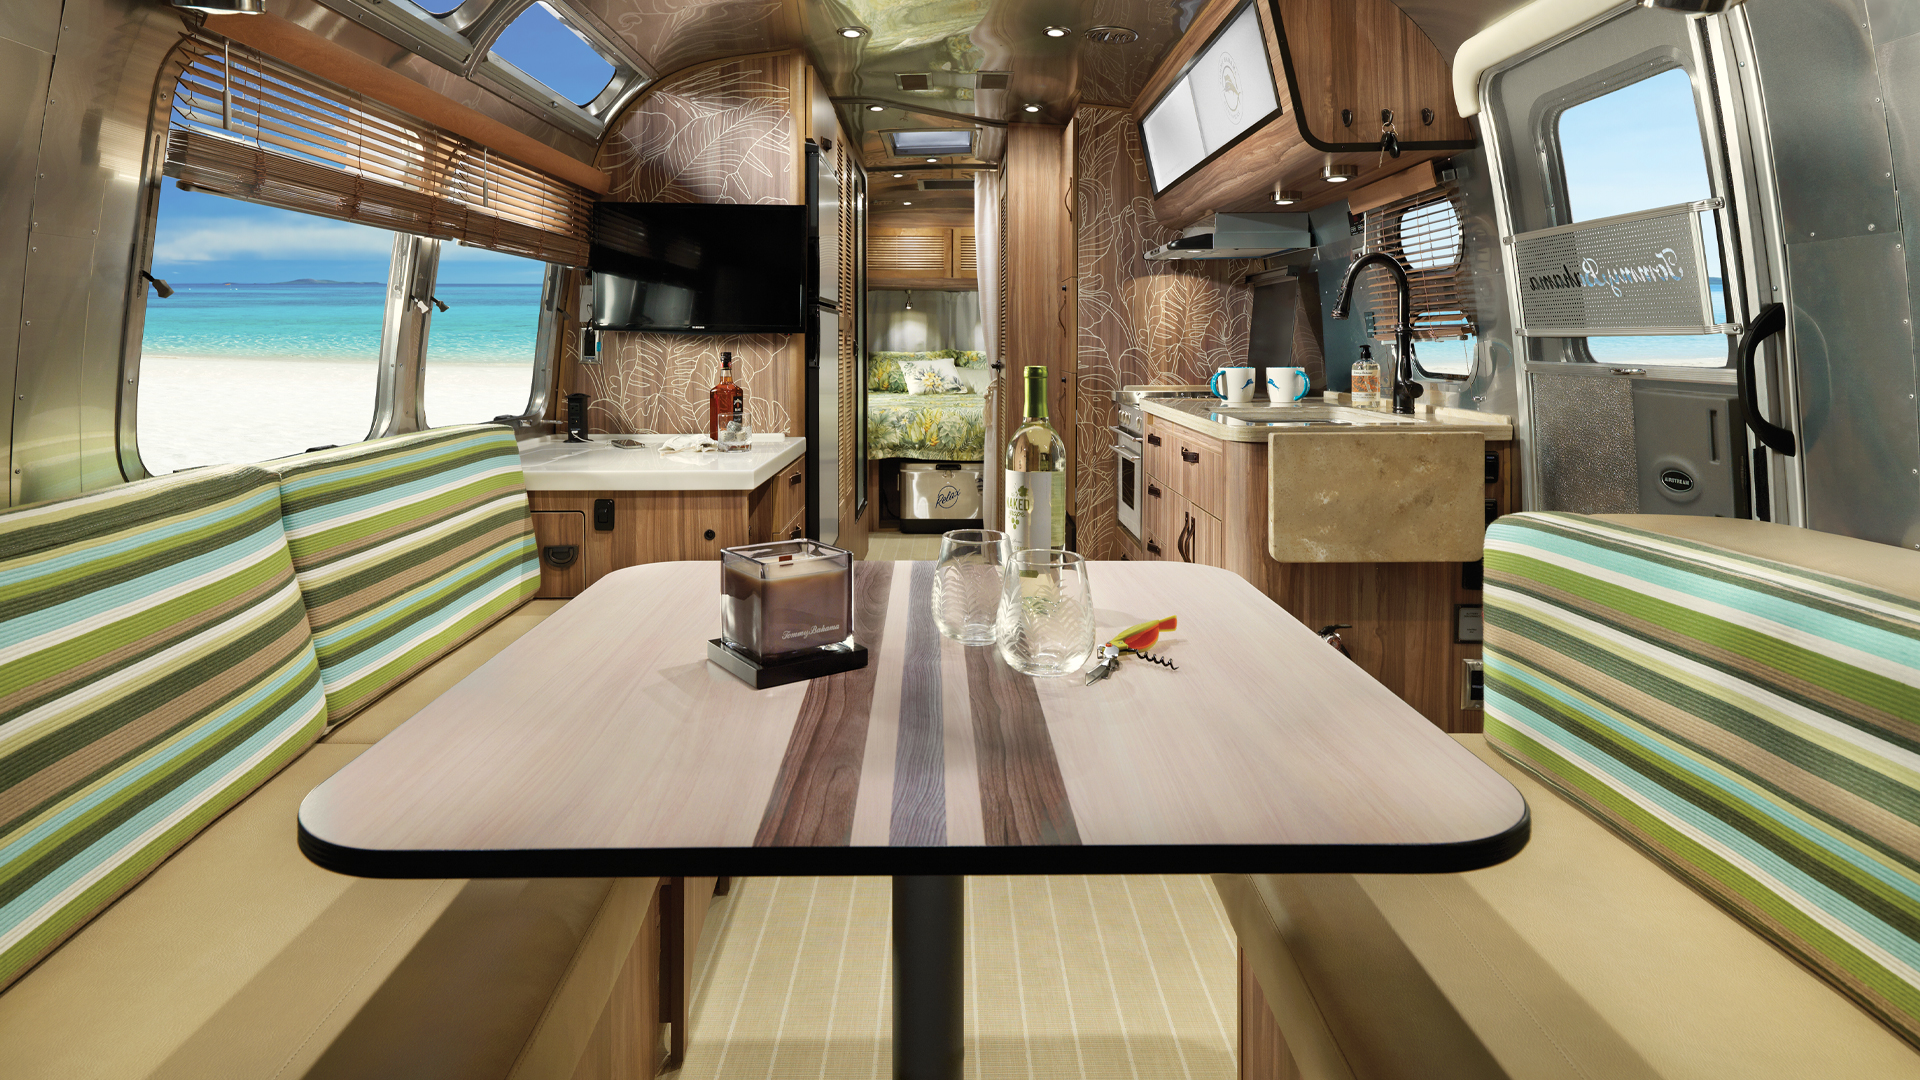 Interior of the Airstream Tommy Bahama Travel Trailer